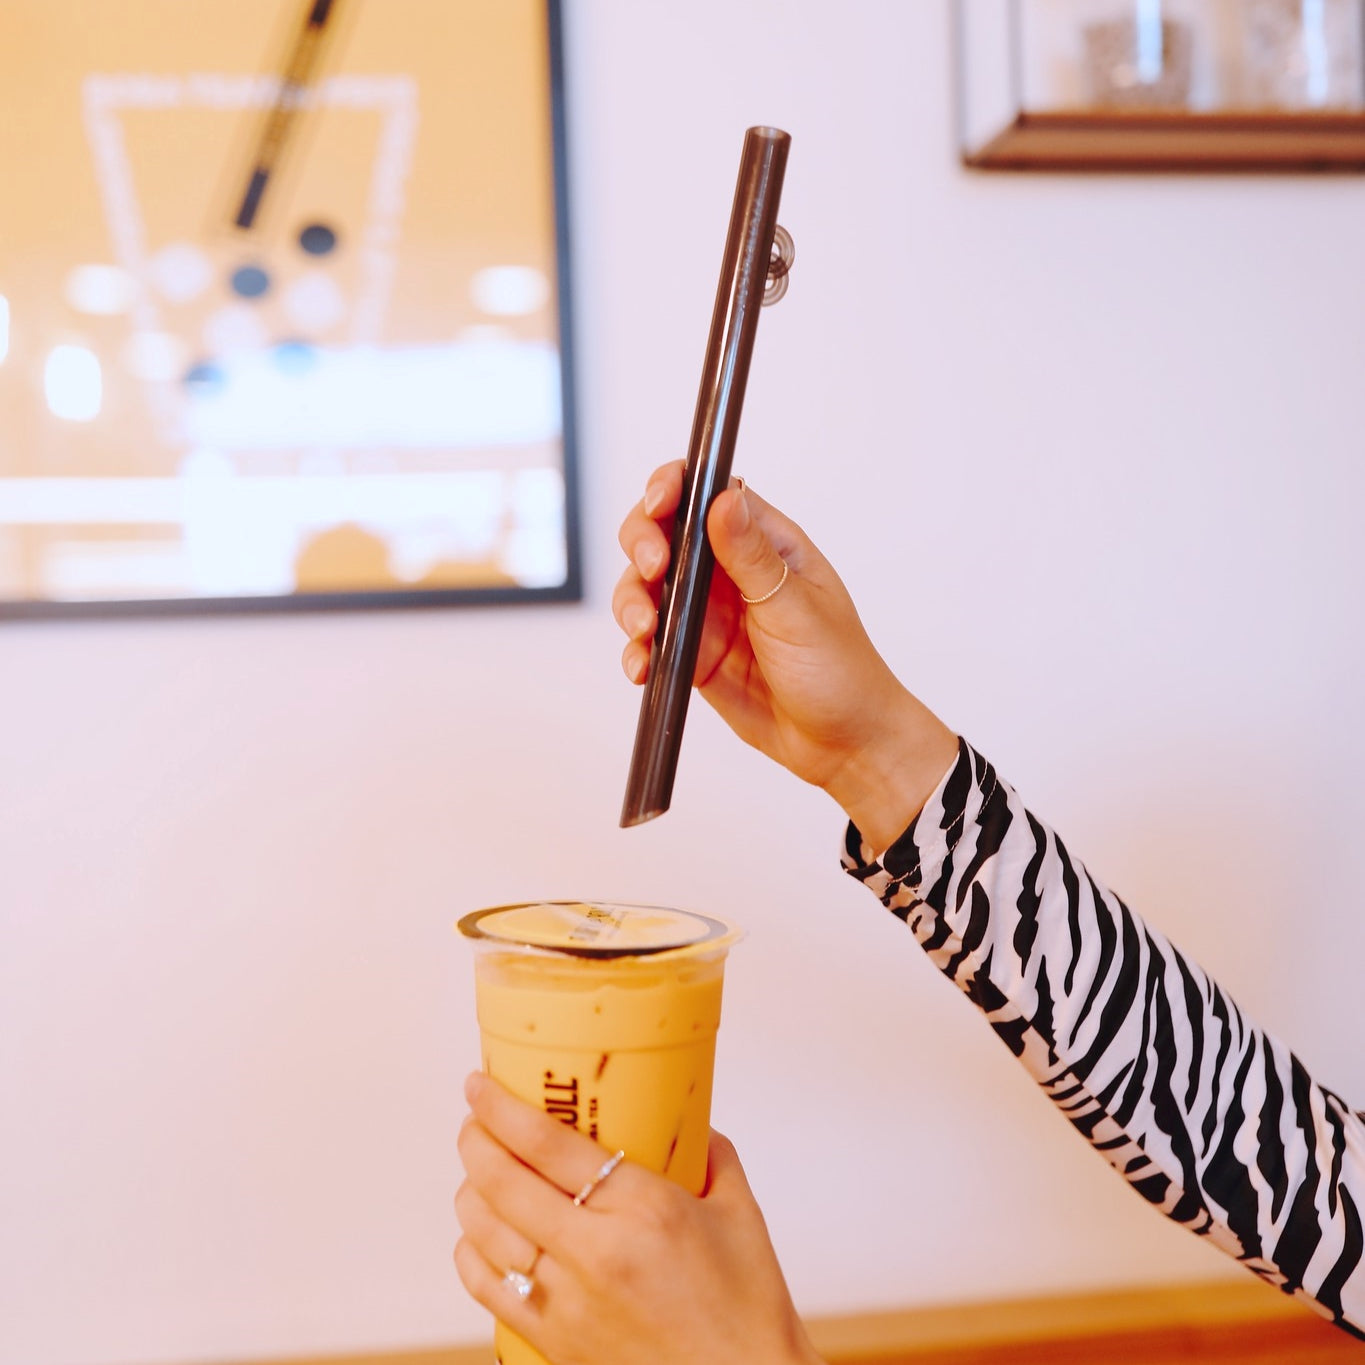 Take the Upside Down Straw Challenge — Does the Ring on Top Work Better?